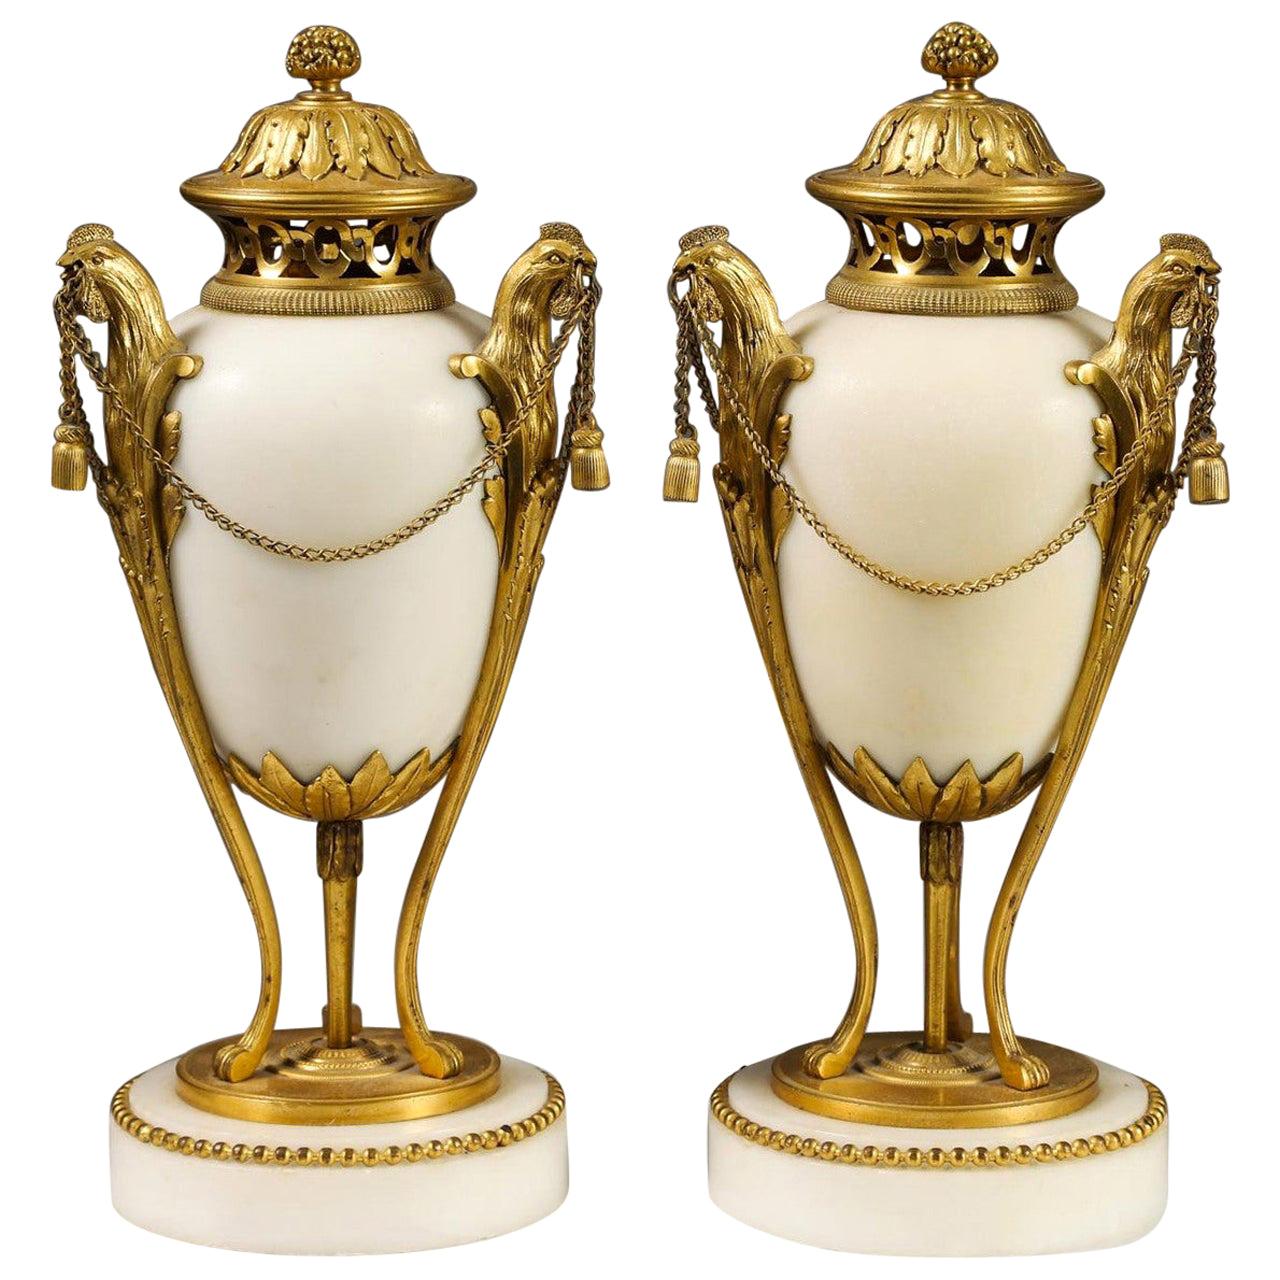 Very Fine Pair of Gilded Bronze and White Marble Covered Urns